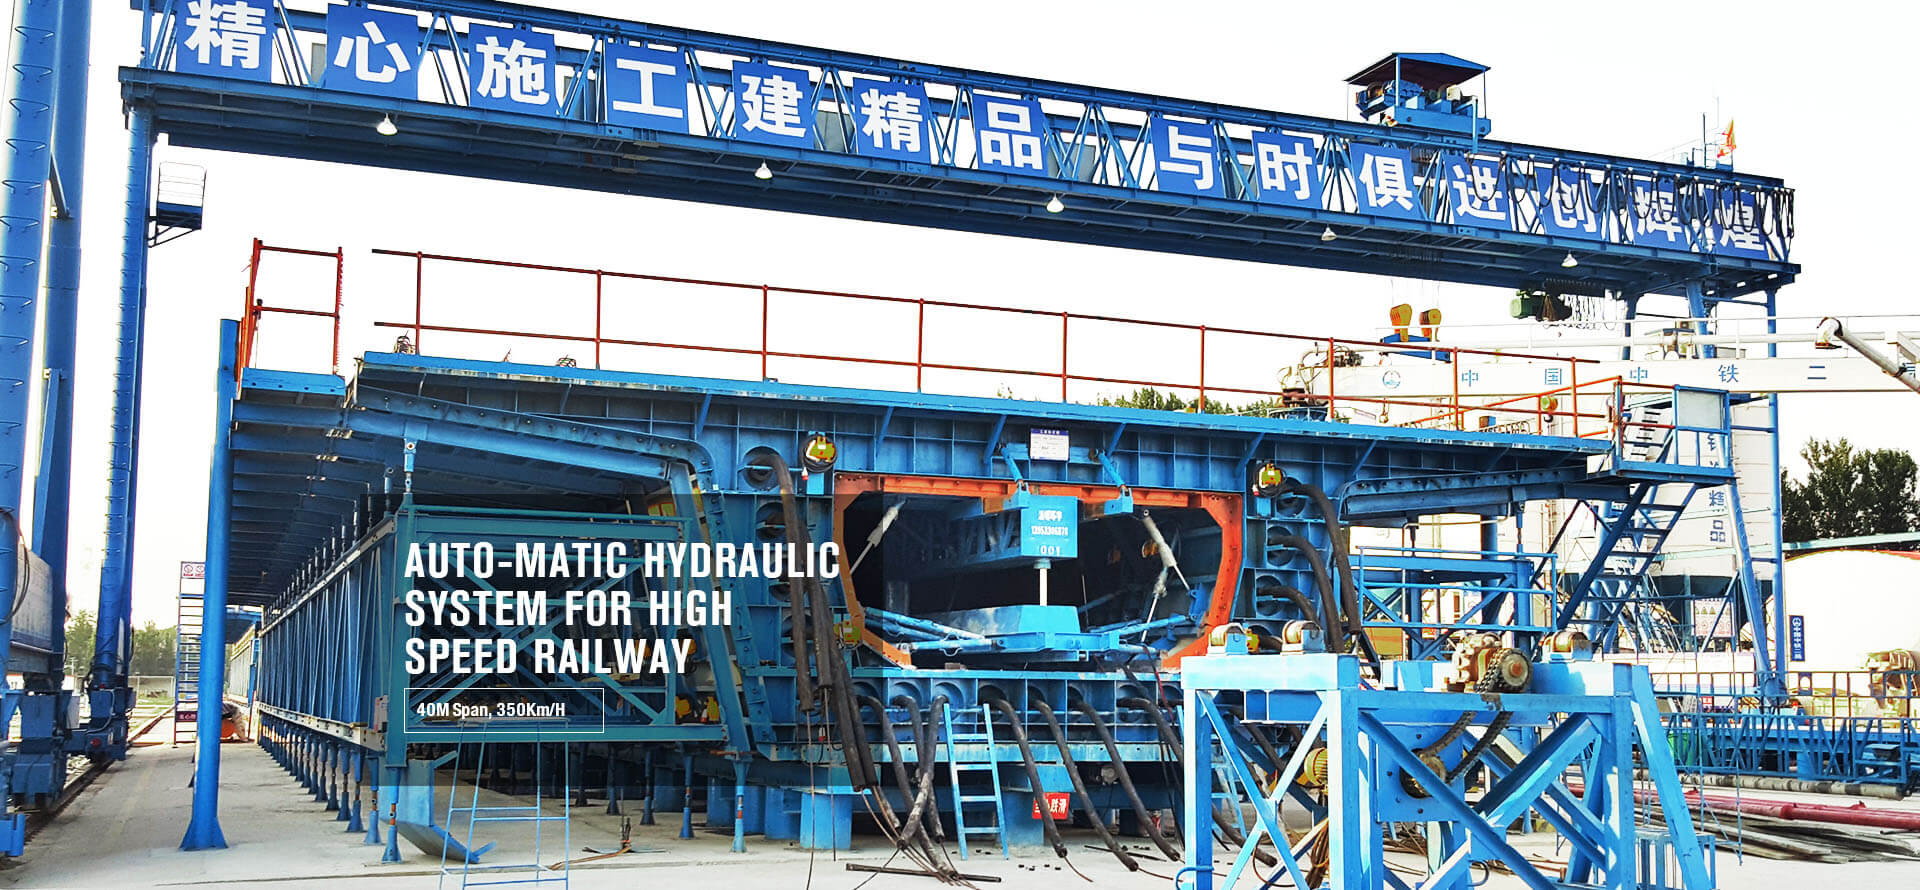 Auto-matic Hydraulic System for High Speed Railway